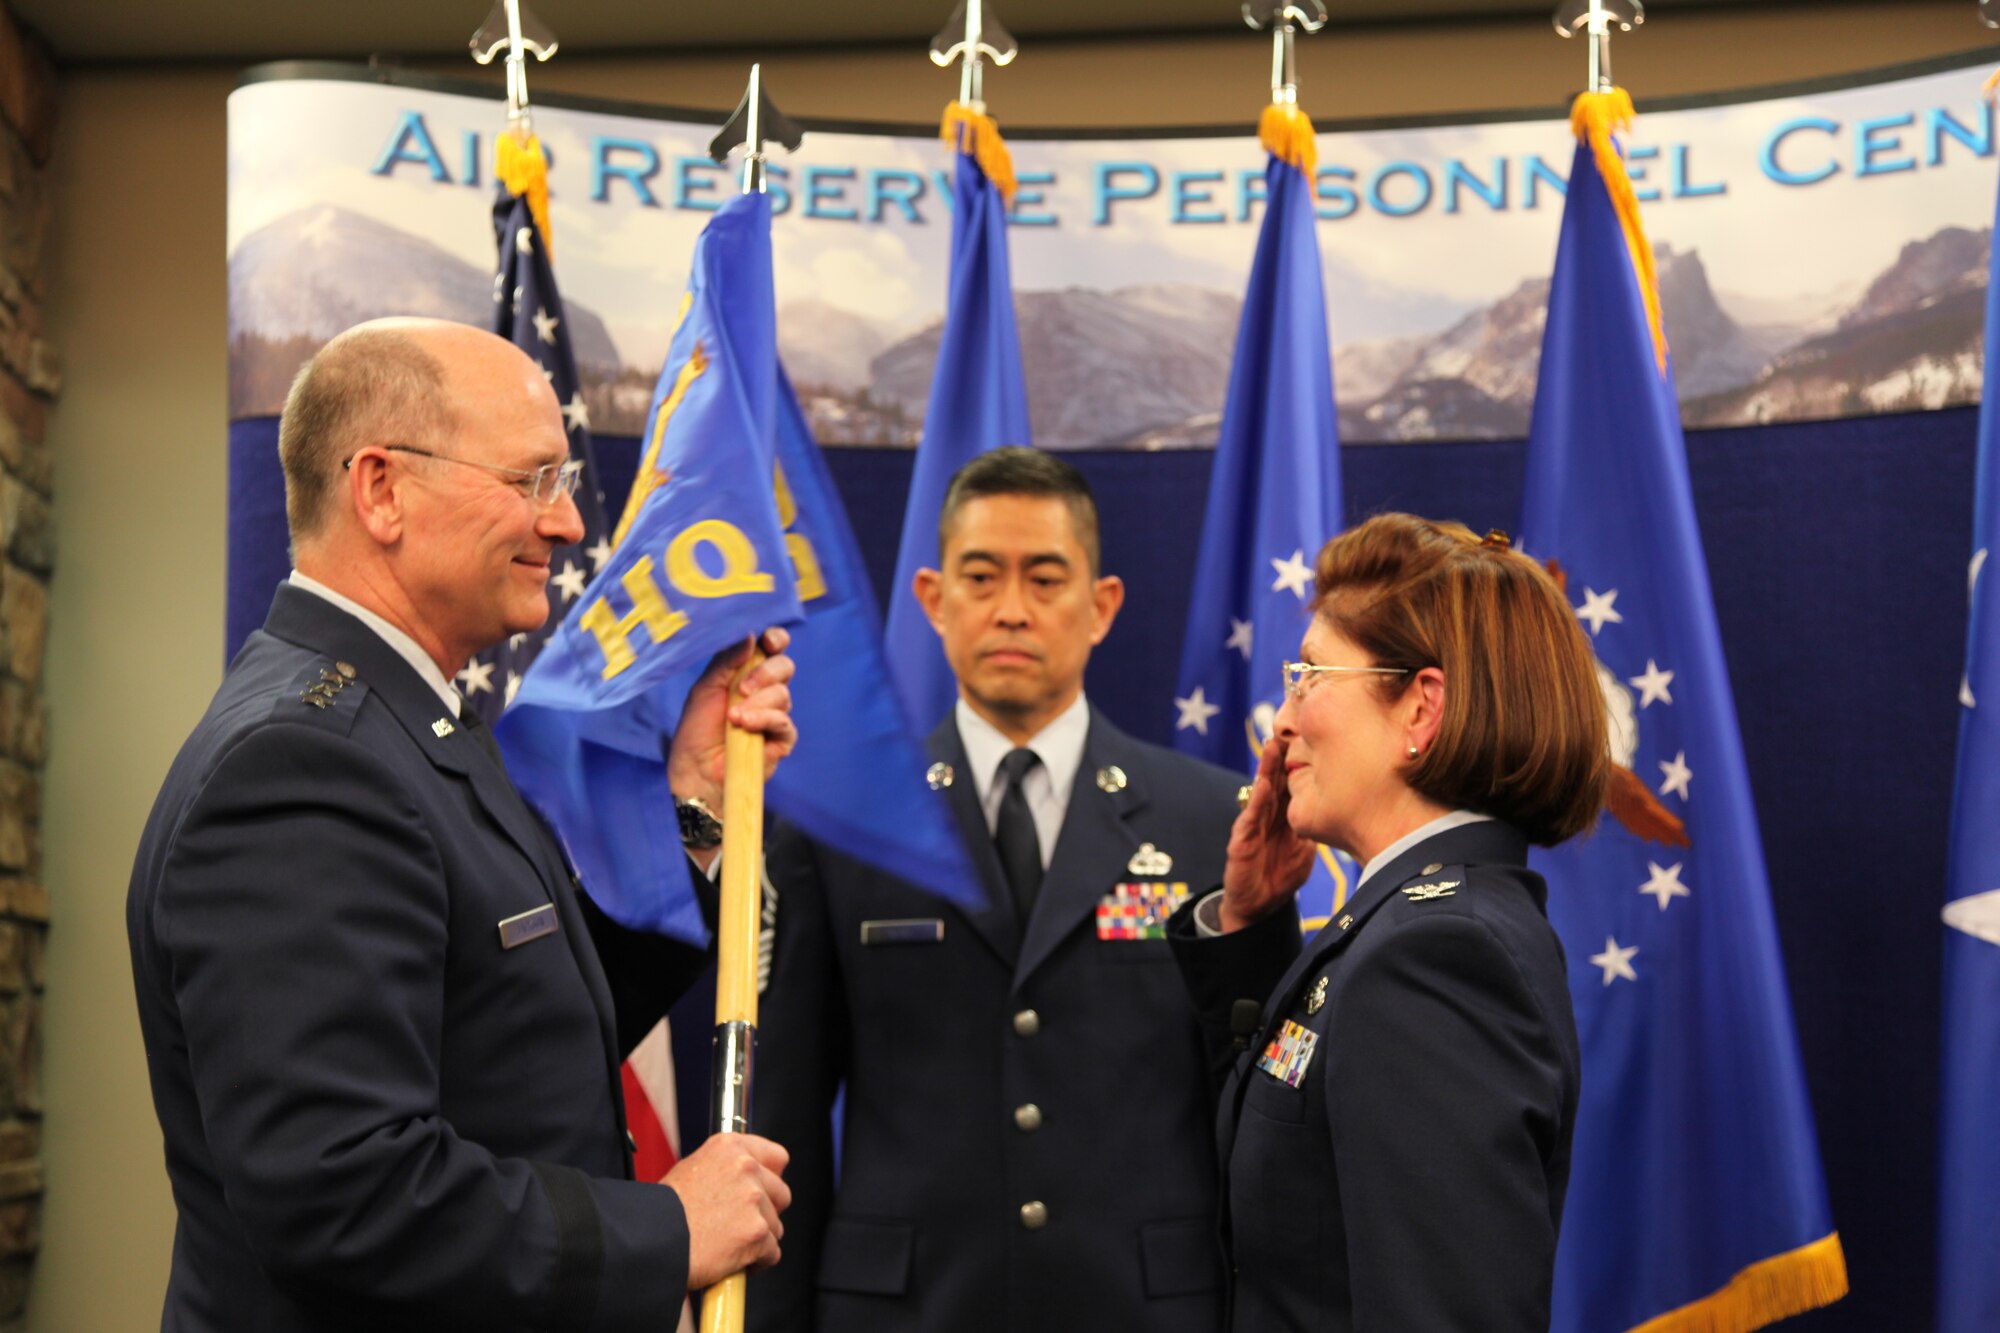 Lt. Gen. James “JJ” Jackson, chief of the Air Force Reserve and commander of the Air Force Reserve Command, receives a salute from outgoing Air Reserve Personnel Center commander, Col. Patricia S. Blassie, as Chief Master Sgt. Brian Wong, ARPC command chief, looks on during a change of command ceremony held Jan. 25, 2013, on Buckley Air Force Base, Colo. Colonel Blassie will serve at the Air Force Reserve Command as the chief of the Professional Development Center. Incoming commander, Brig. Gen. John C. Flournoy, Jr., assumed command of the center. General Flournoy was the 349th Air Mobility Wing Commander at Travis AFB, Calif. (U.S. Air Force photo by Tech. Sgt. Rob Hazelett)